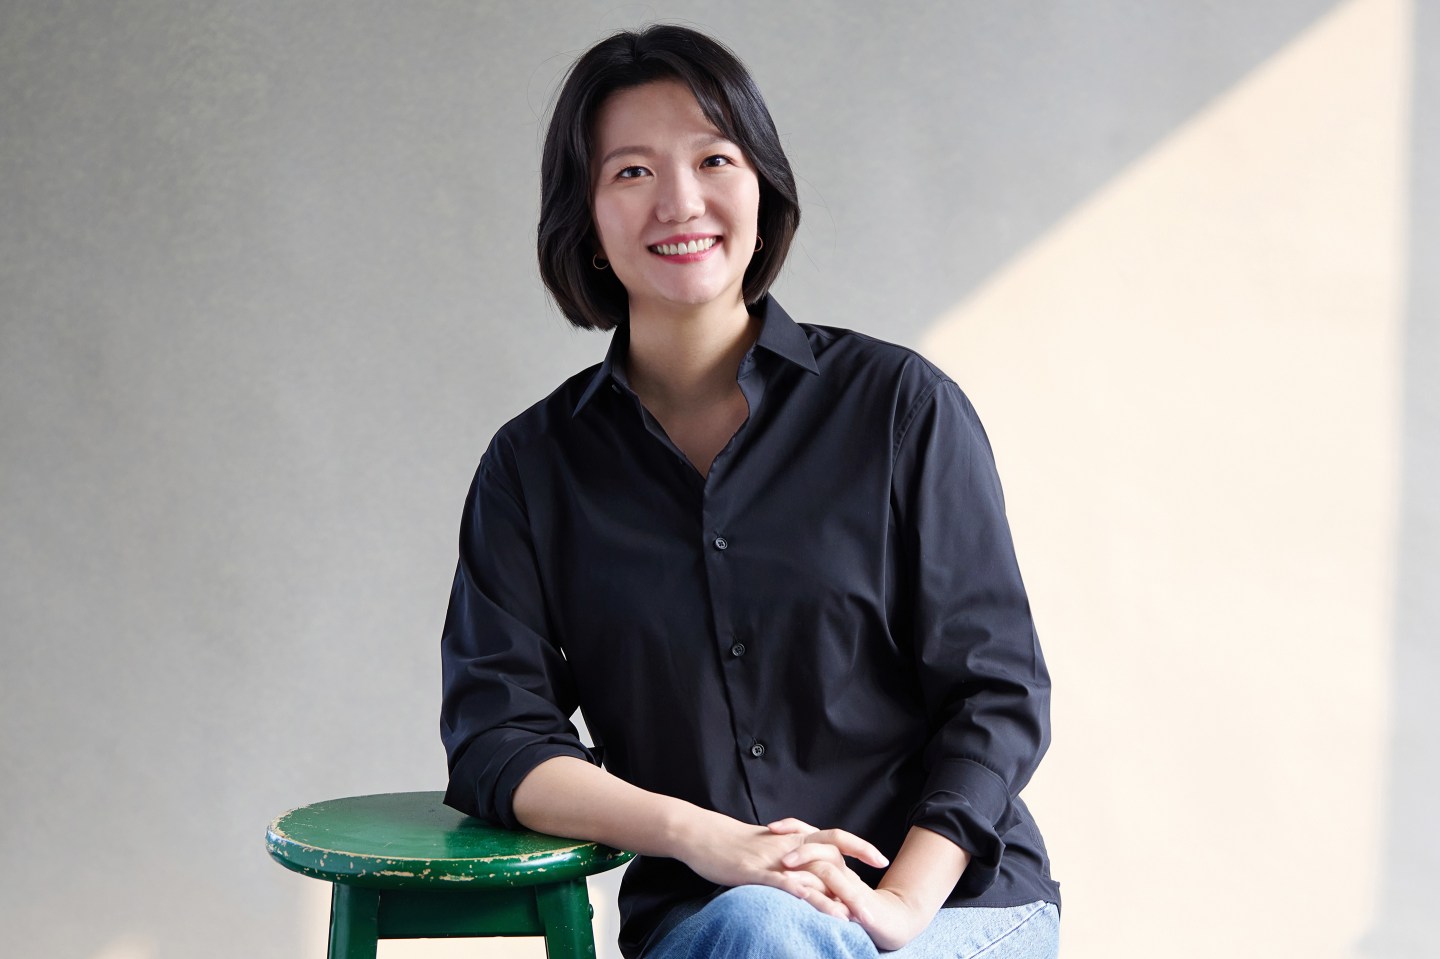 Choi is a rare female CEO in South Korea, where last year four of the top 100 companies had women chief executives.